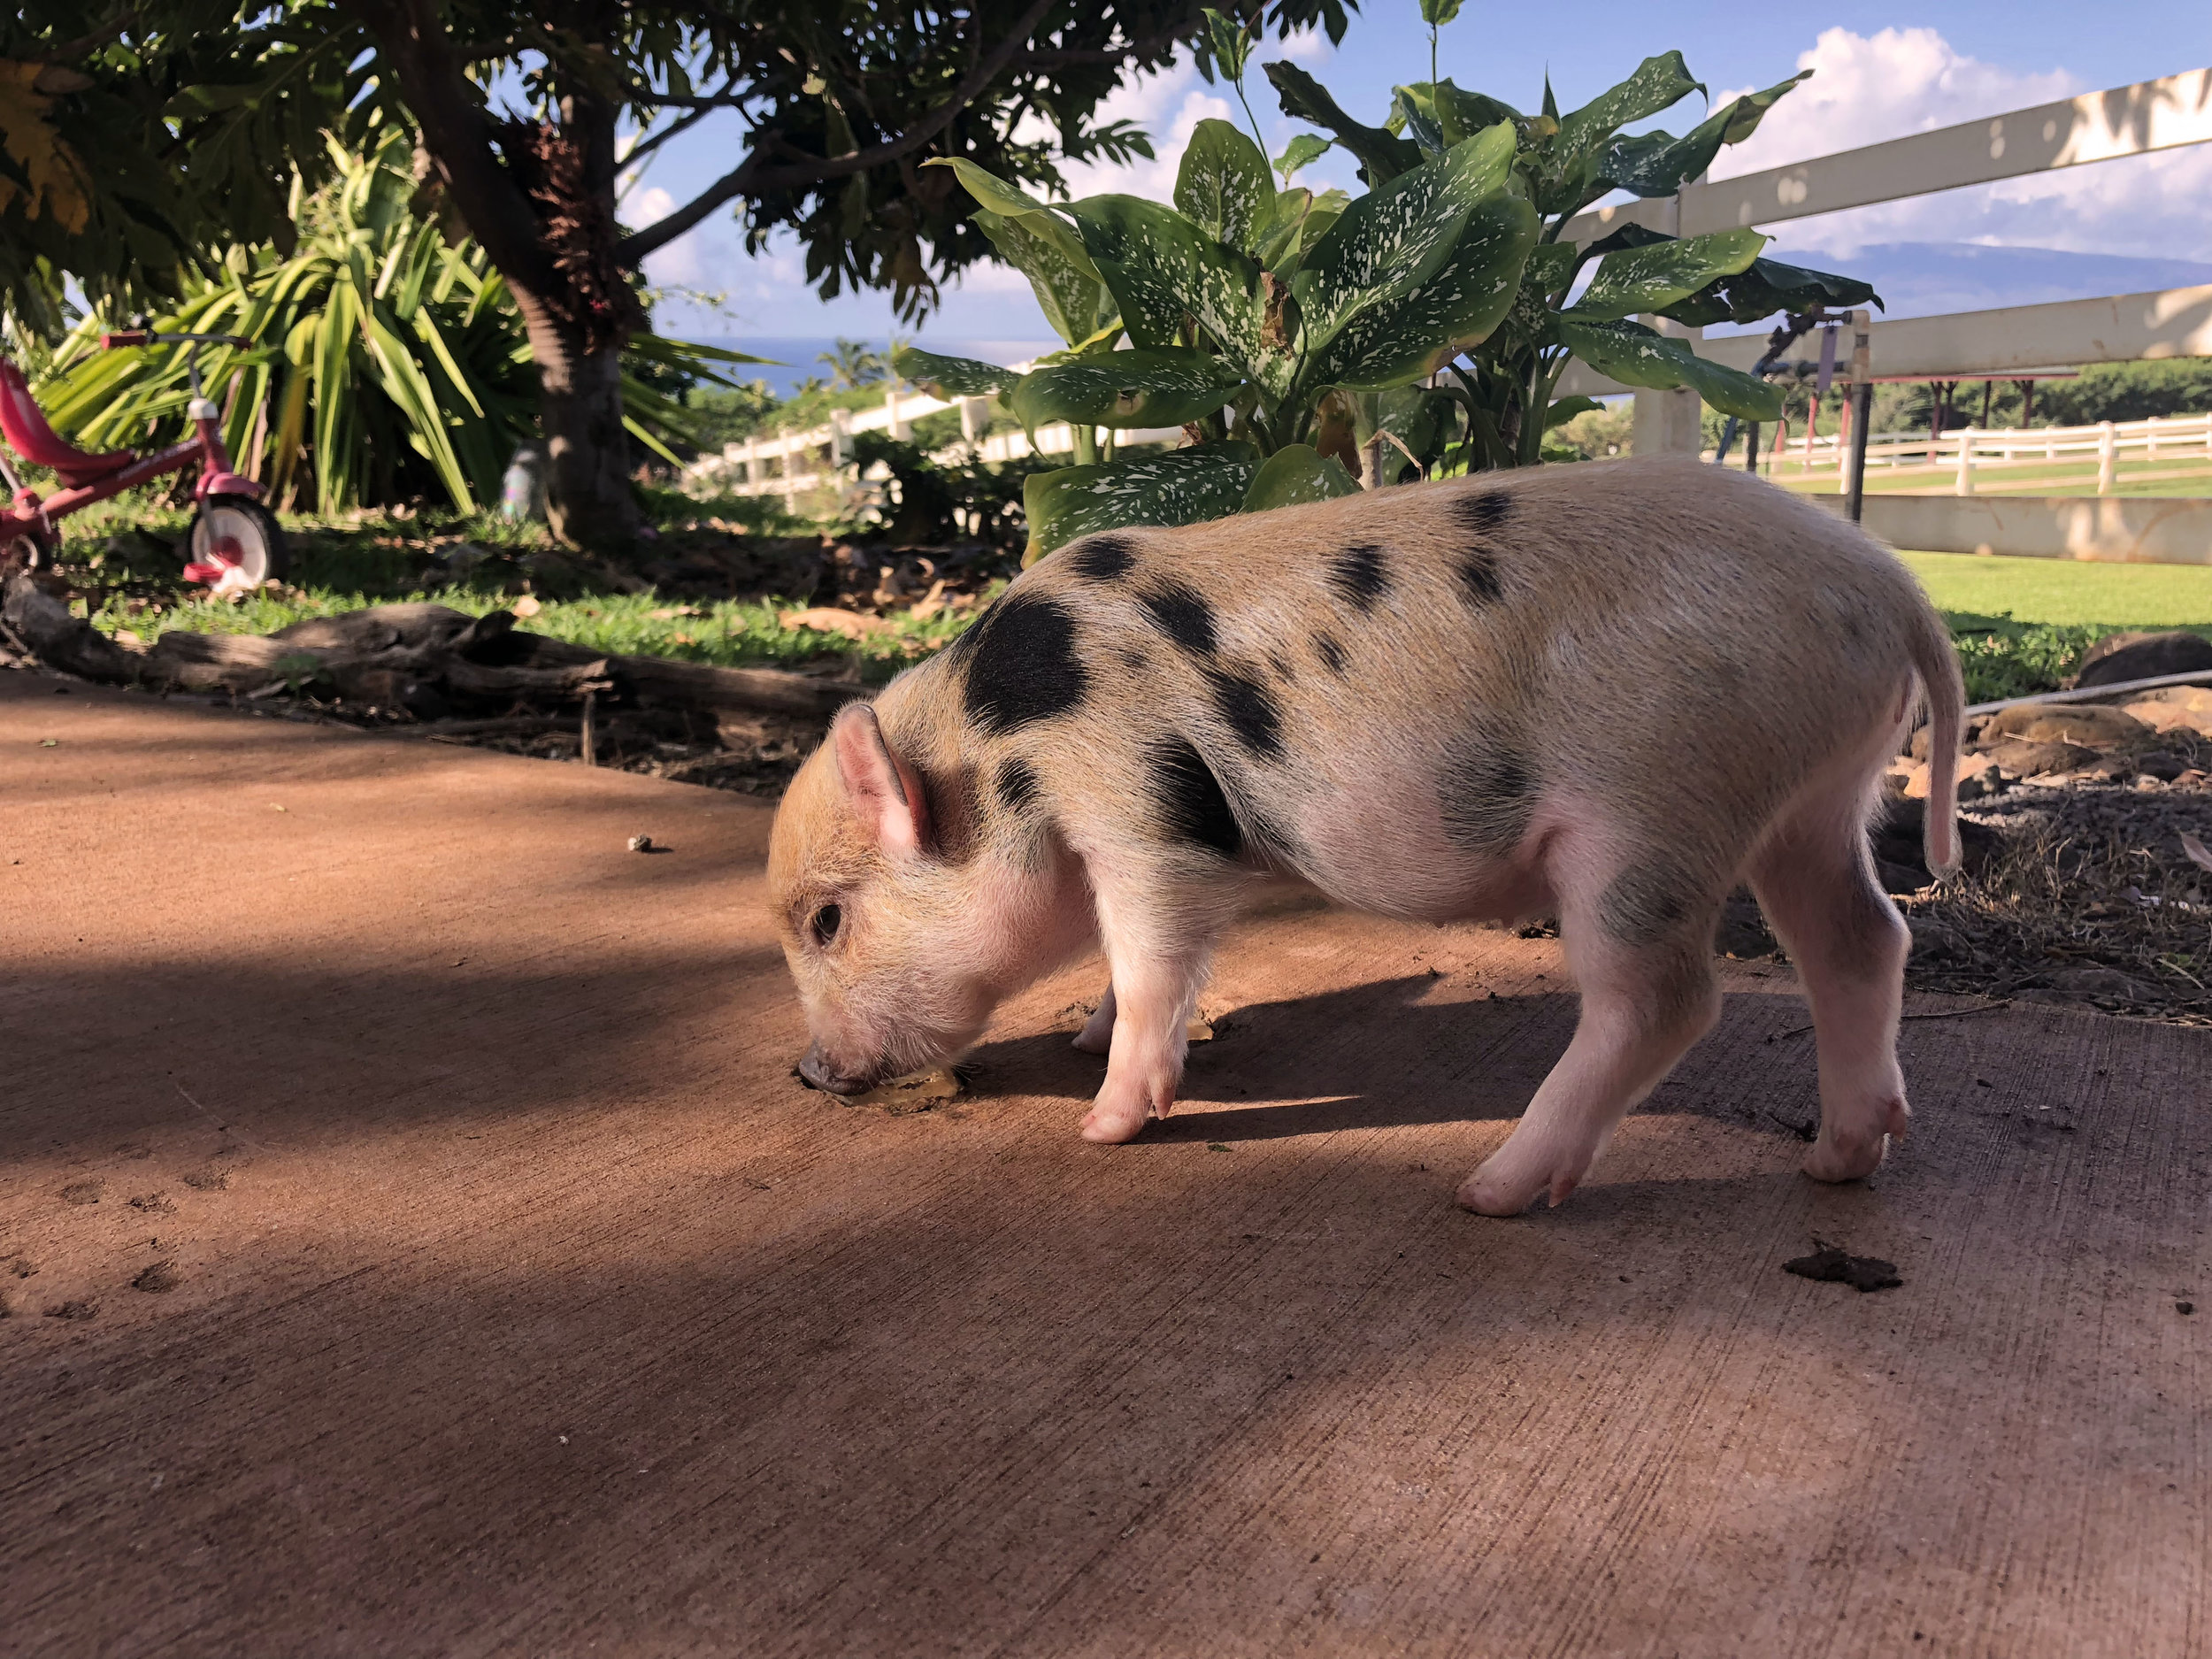 "Pua" the pot bellied pig at 6 months of age.